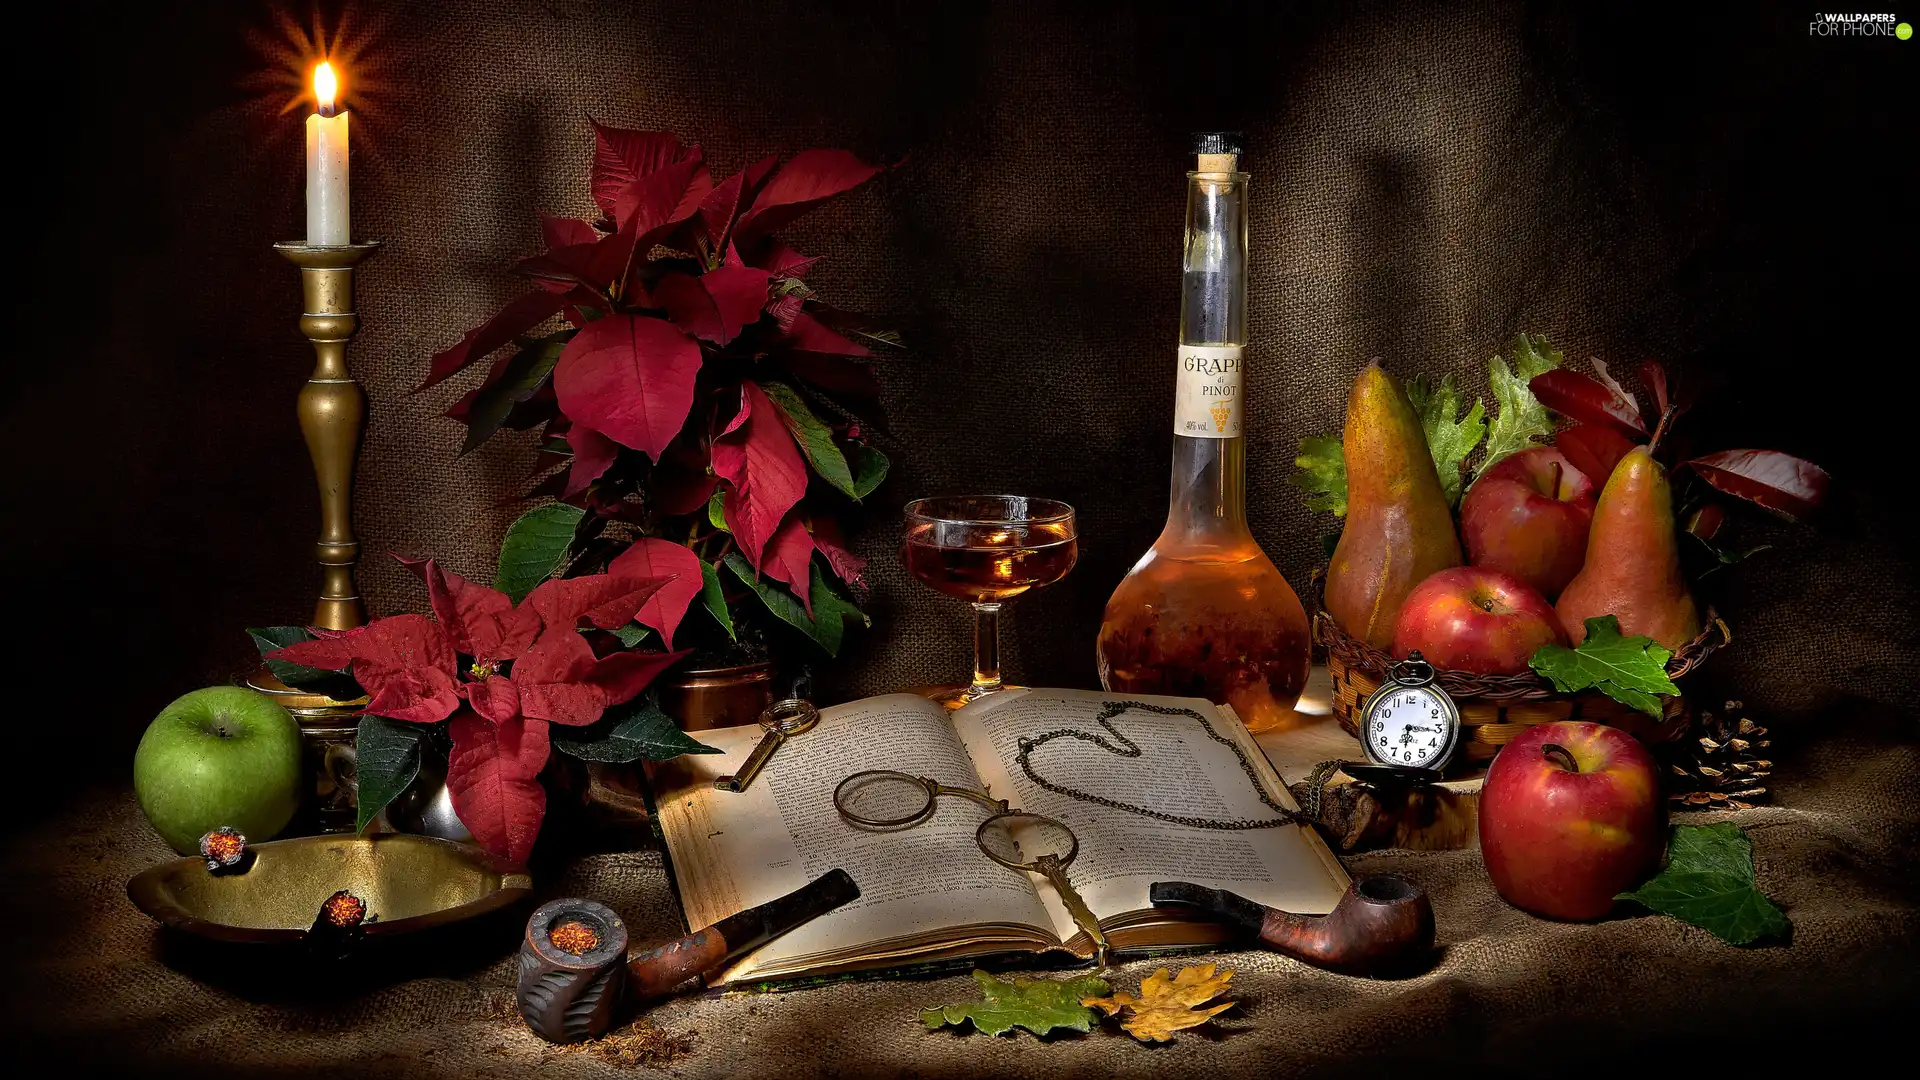 pipe, candle, apples, Wine, truck concrete mixer, star of Bethlehem, Book, composition, Bottle, Watch